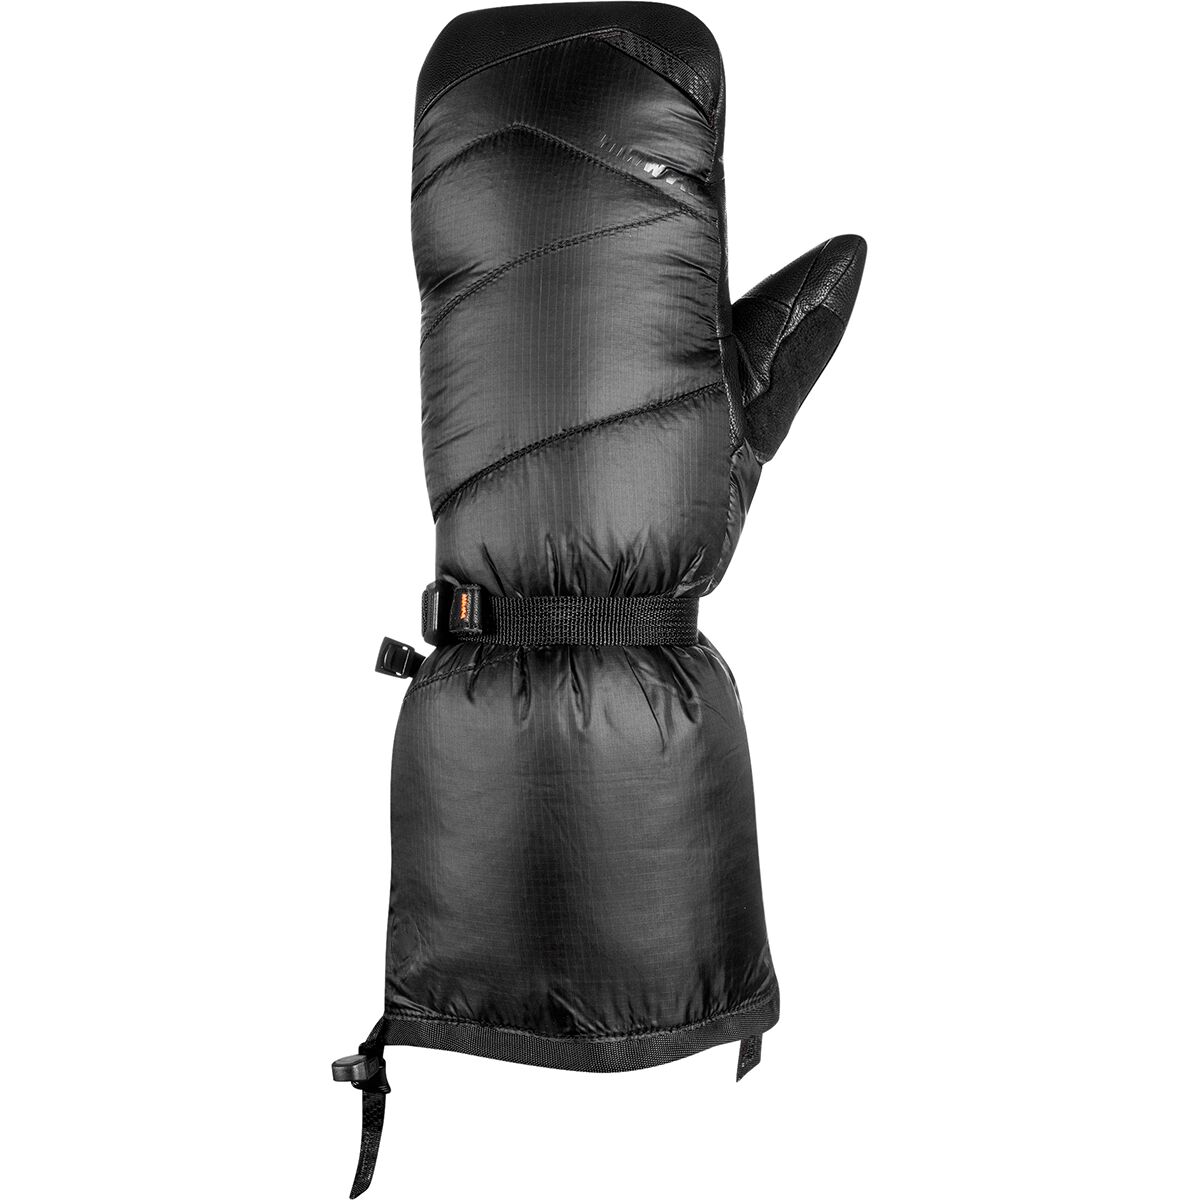 Hard Mixed Glove by Mountain Equipment | US-Parks.com